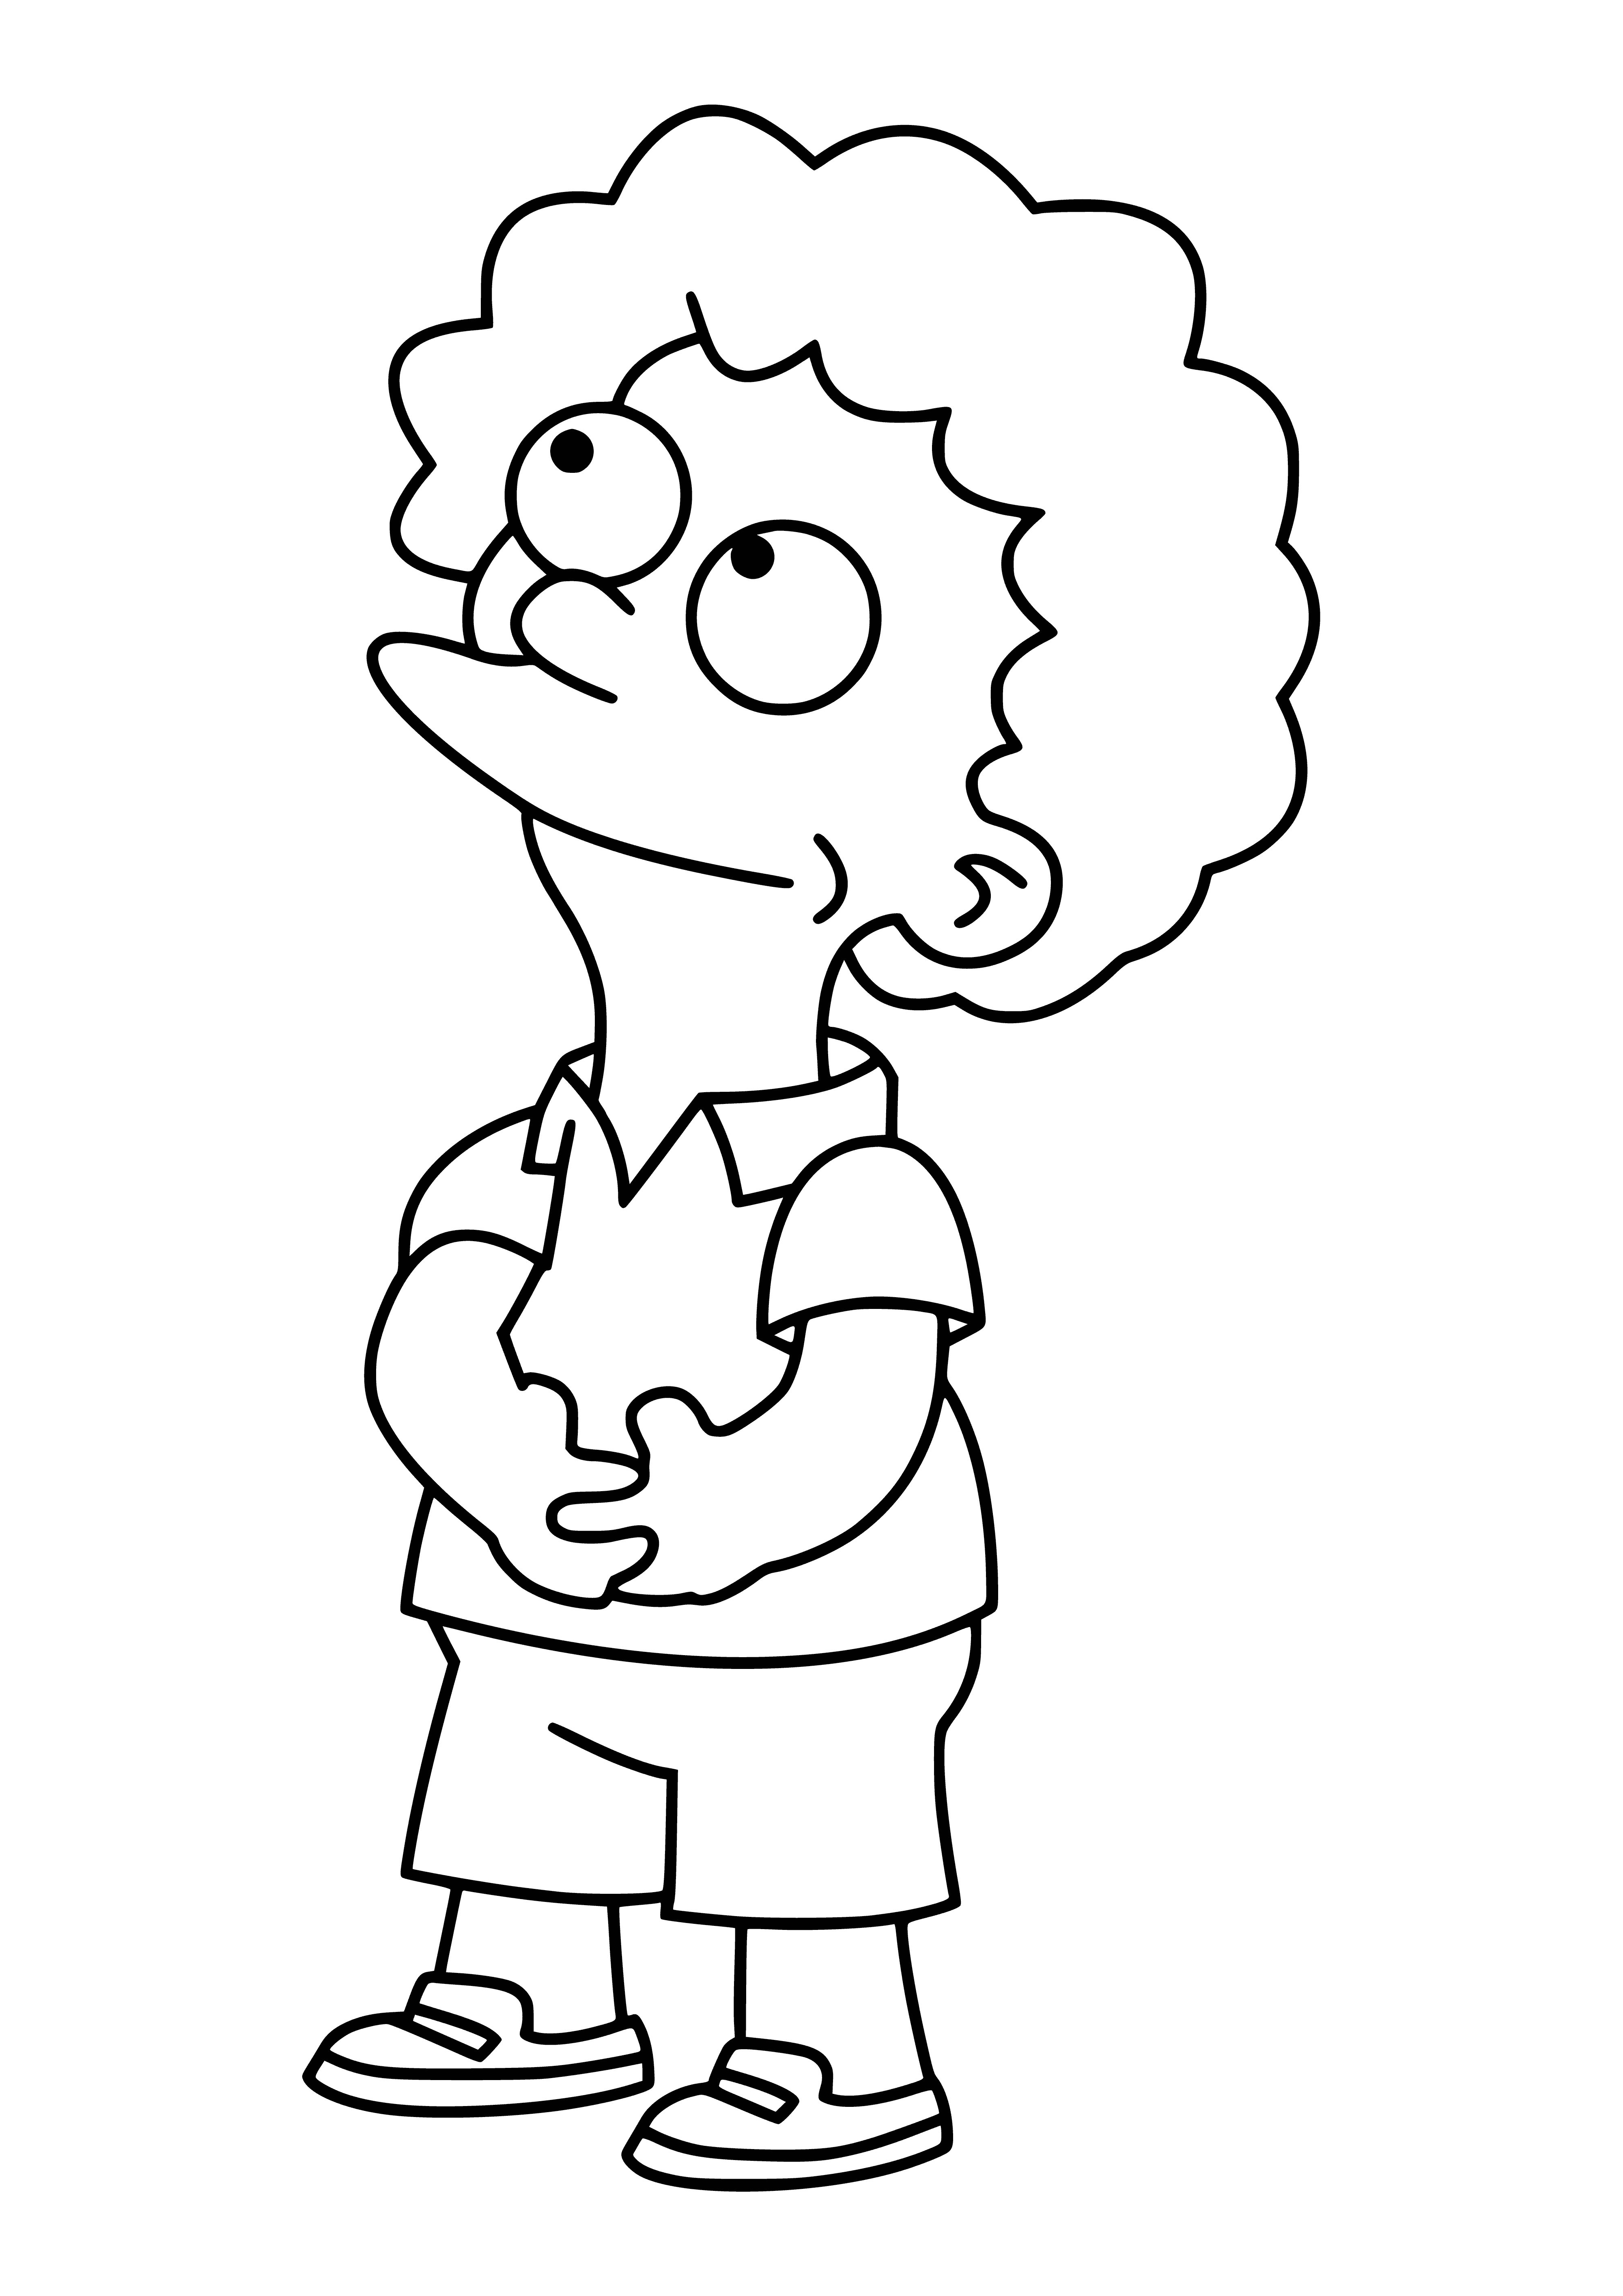 coloring page: Todd Flanders is a young boy with light brown hair wearing a white shirt, blue sweater vest, red tie, and blue shorts with black glasses.